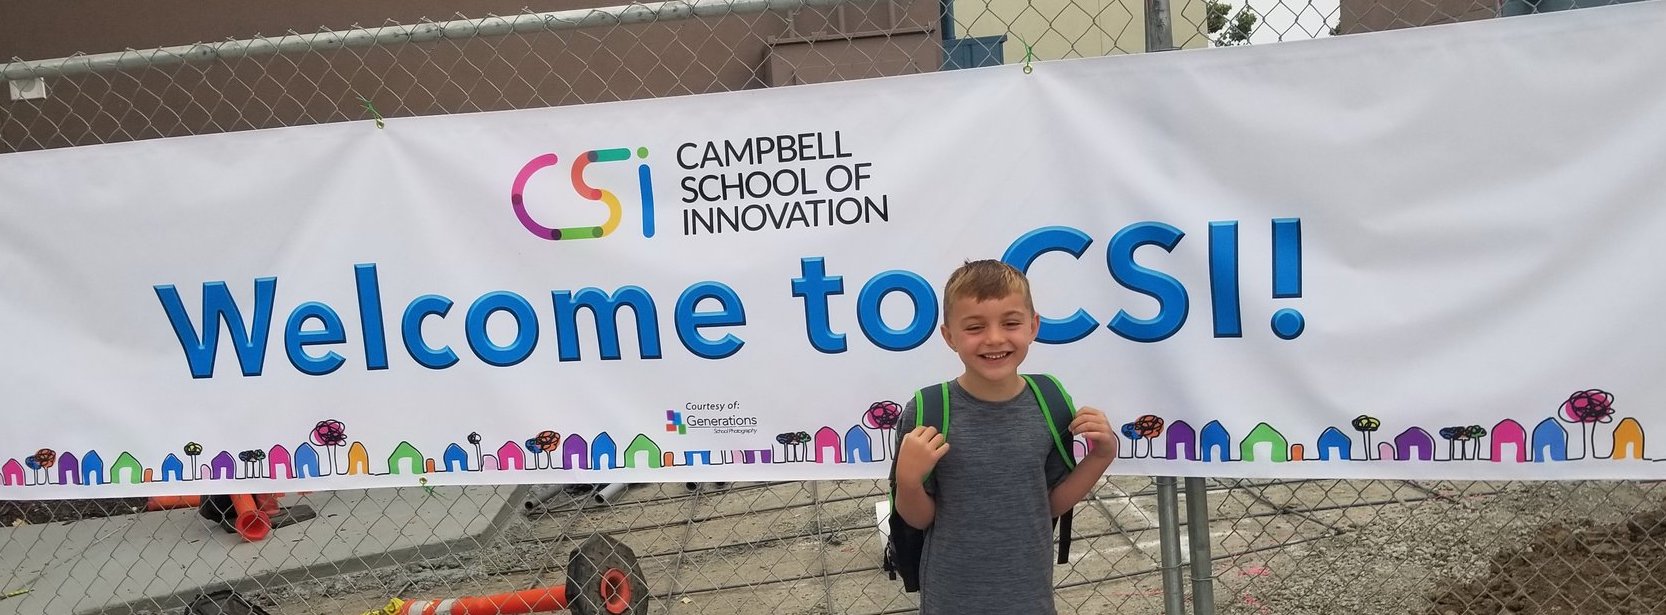 young boy with backpack in front of welcome banner